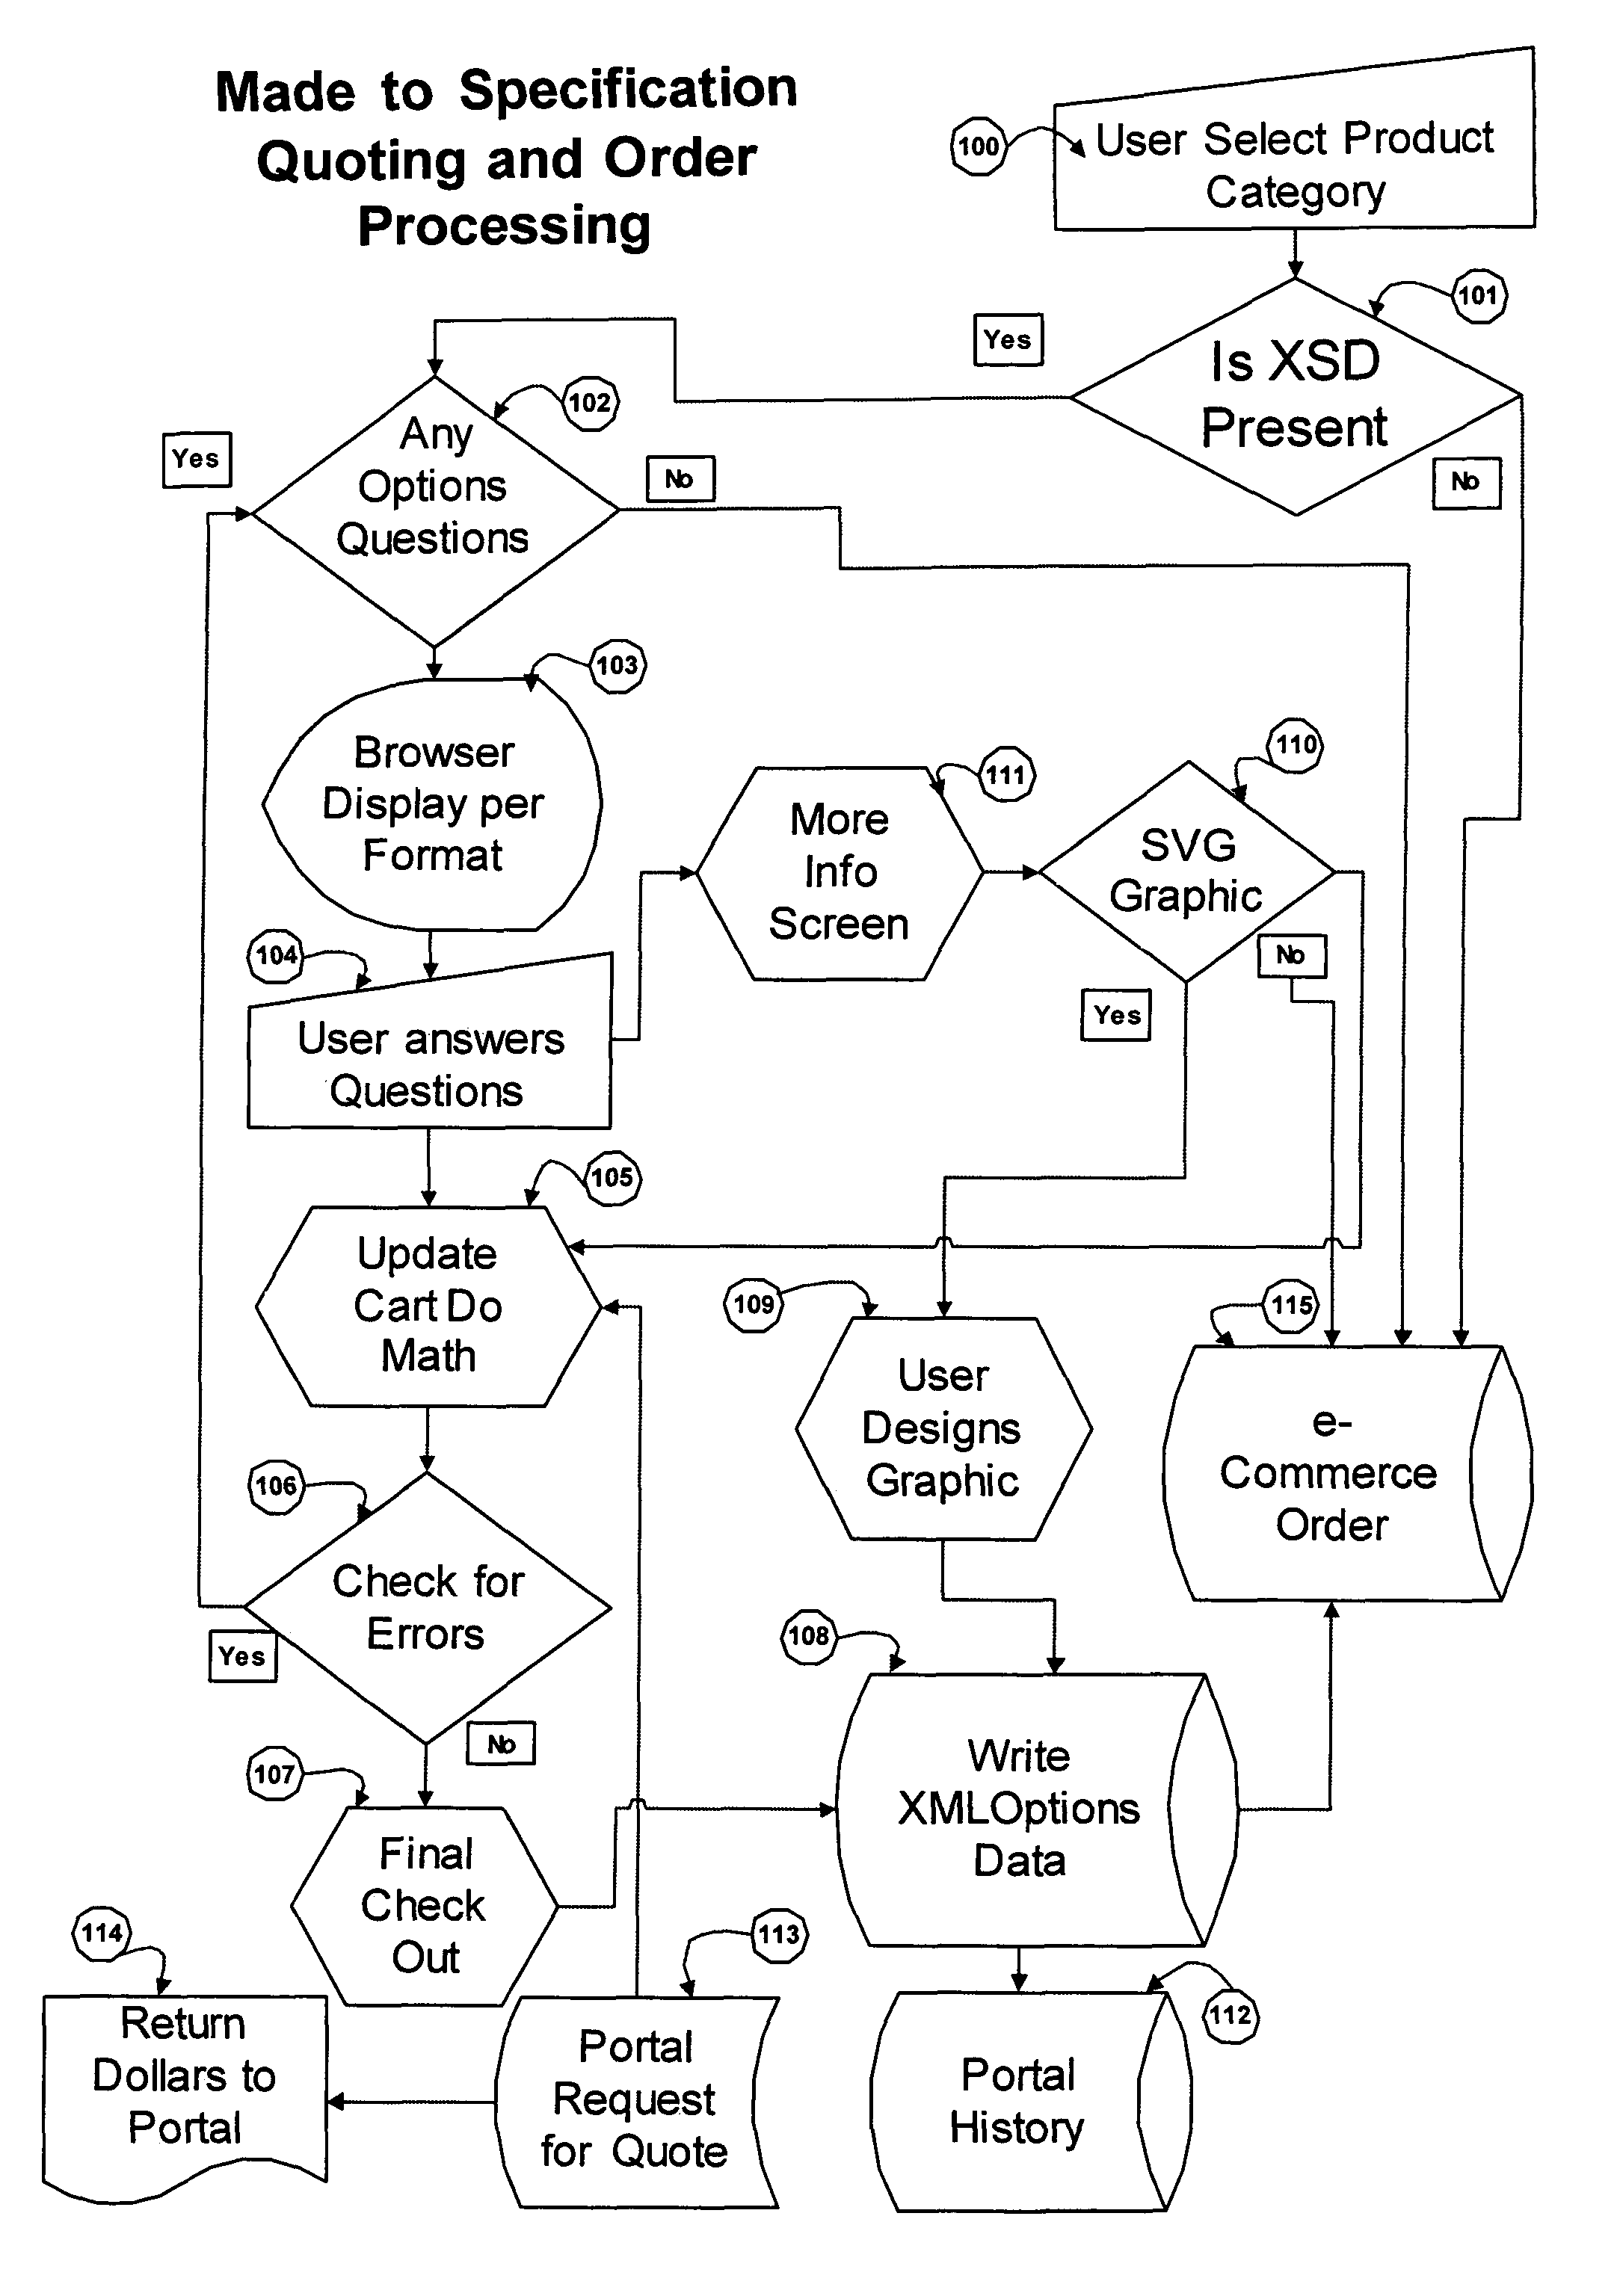 System and method for a made to specification e-commerce quoting and orders processing system on a stand alone or integrated portal